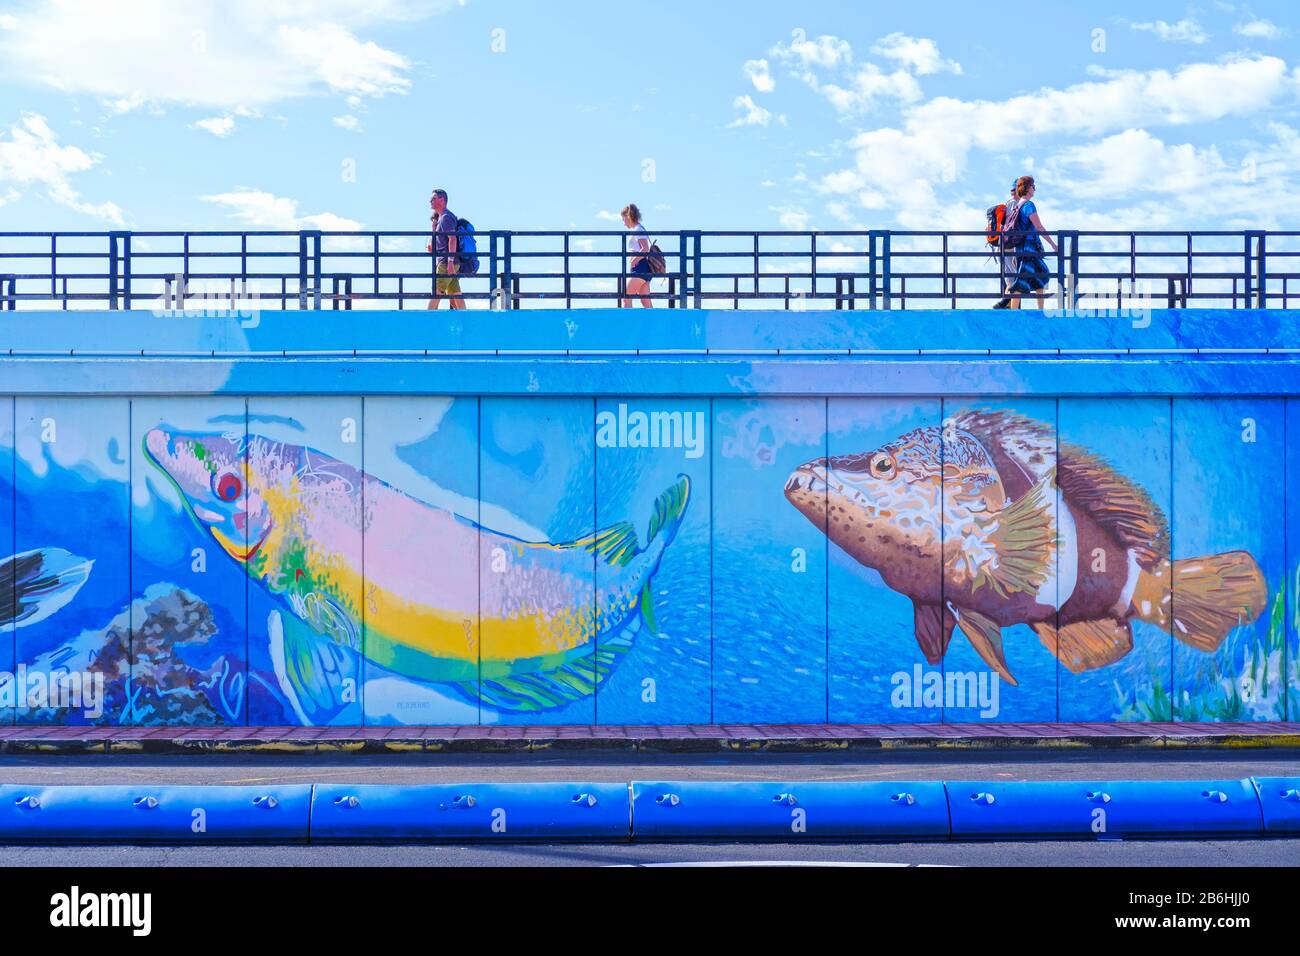 Harbour wall with larger-than-life paintings of sea animals, Los Cristianos, Tenerife, Canary Islands, Spain Stock Photo